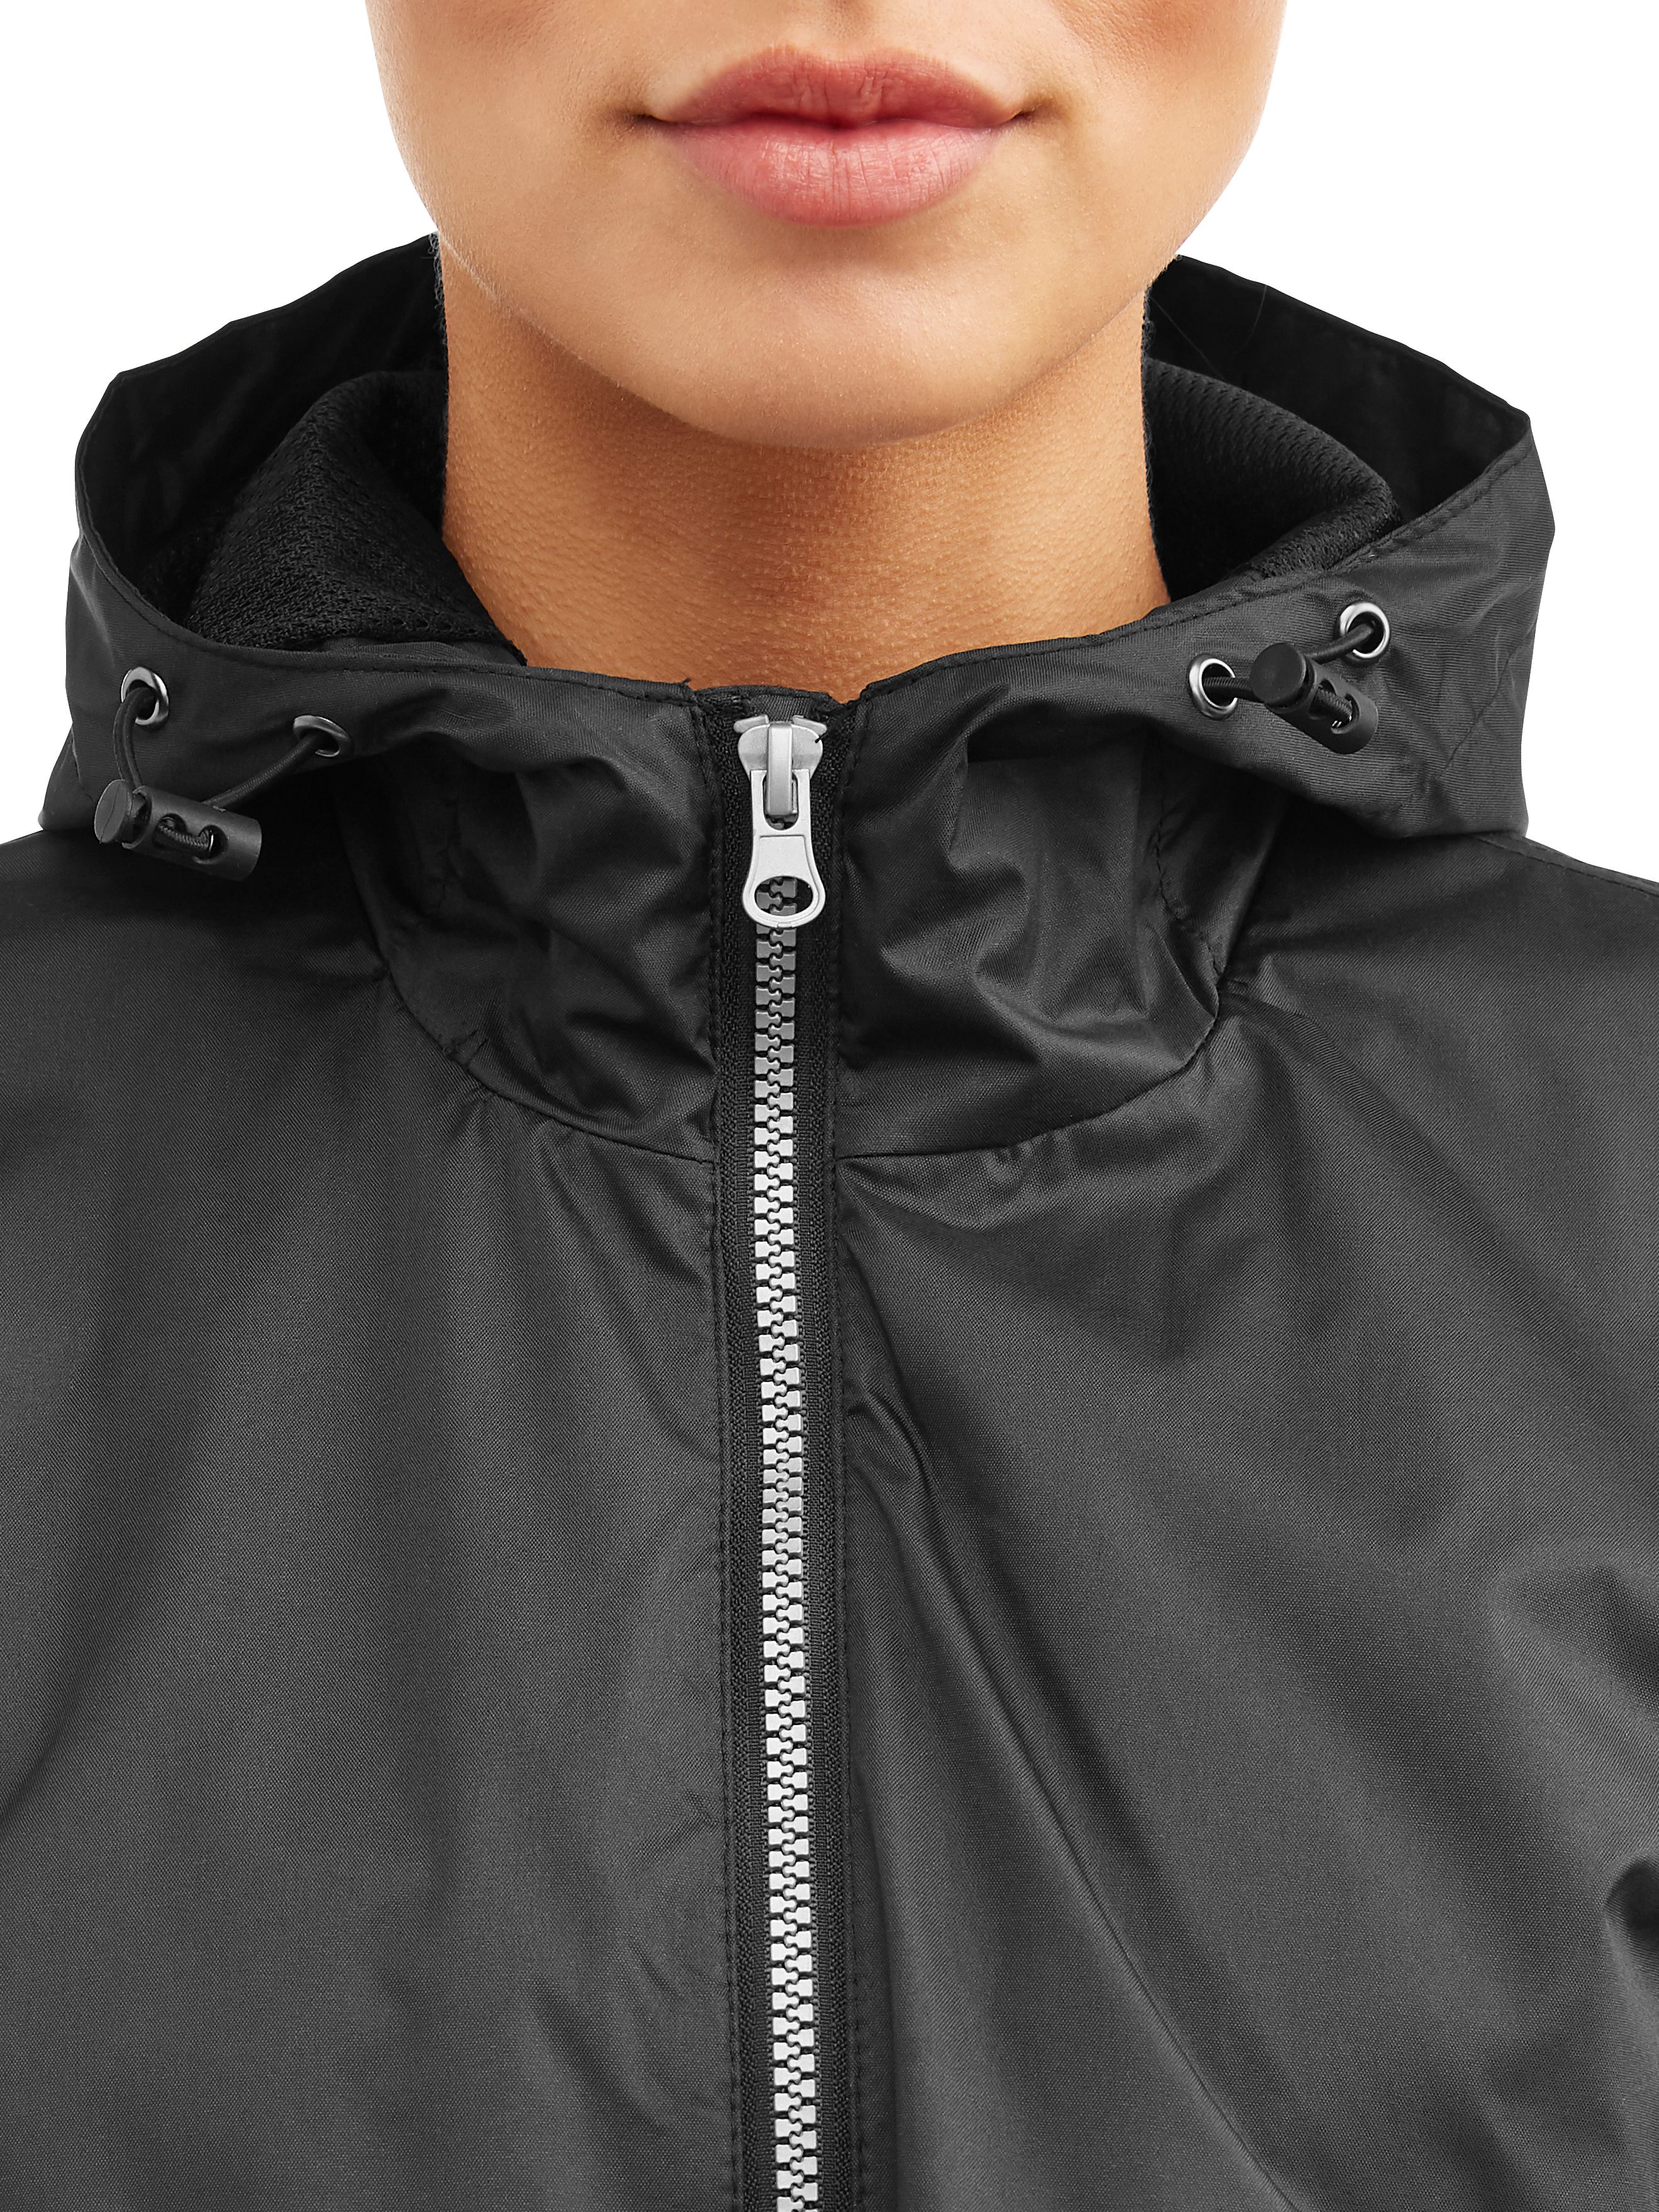 Climate Concepts Women's Hooded Windbreaker Jacket - image 4 of 4